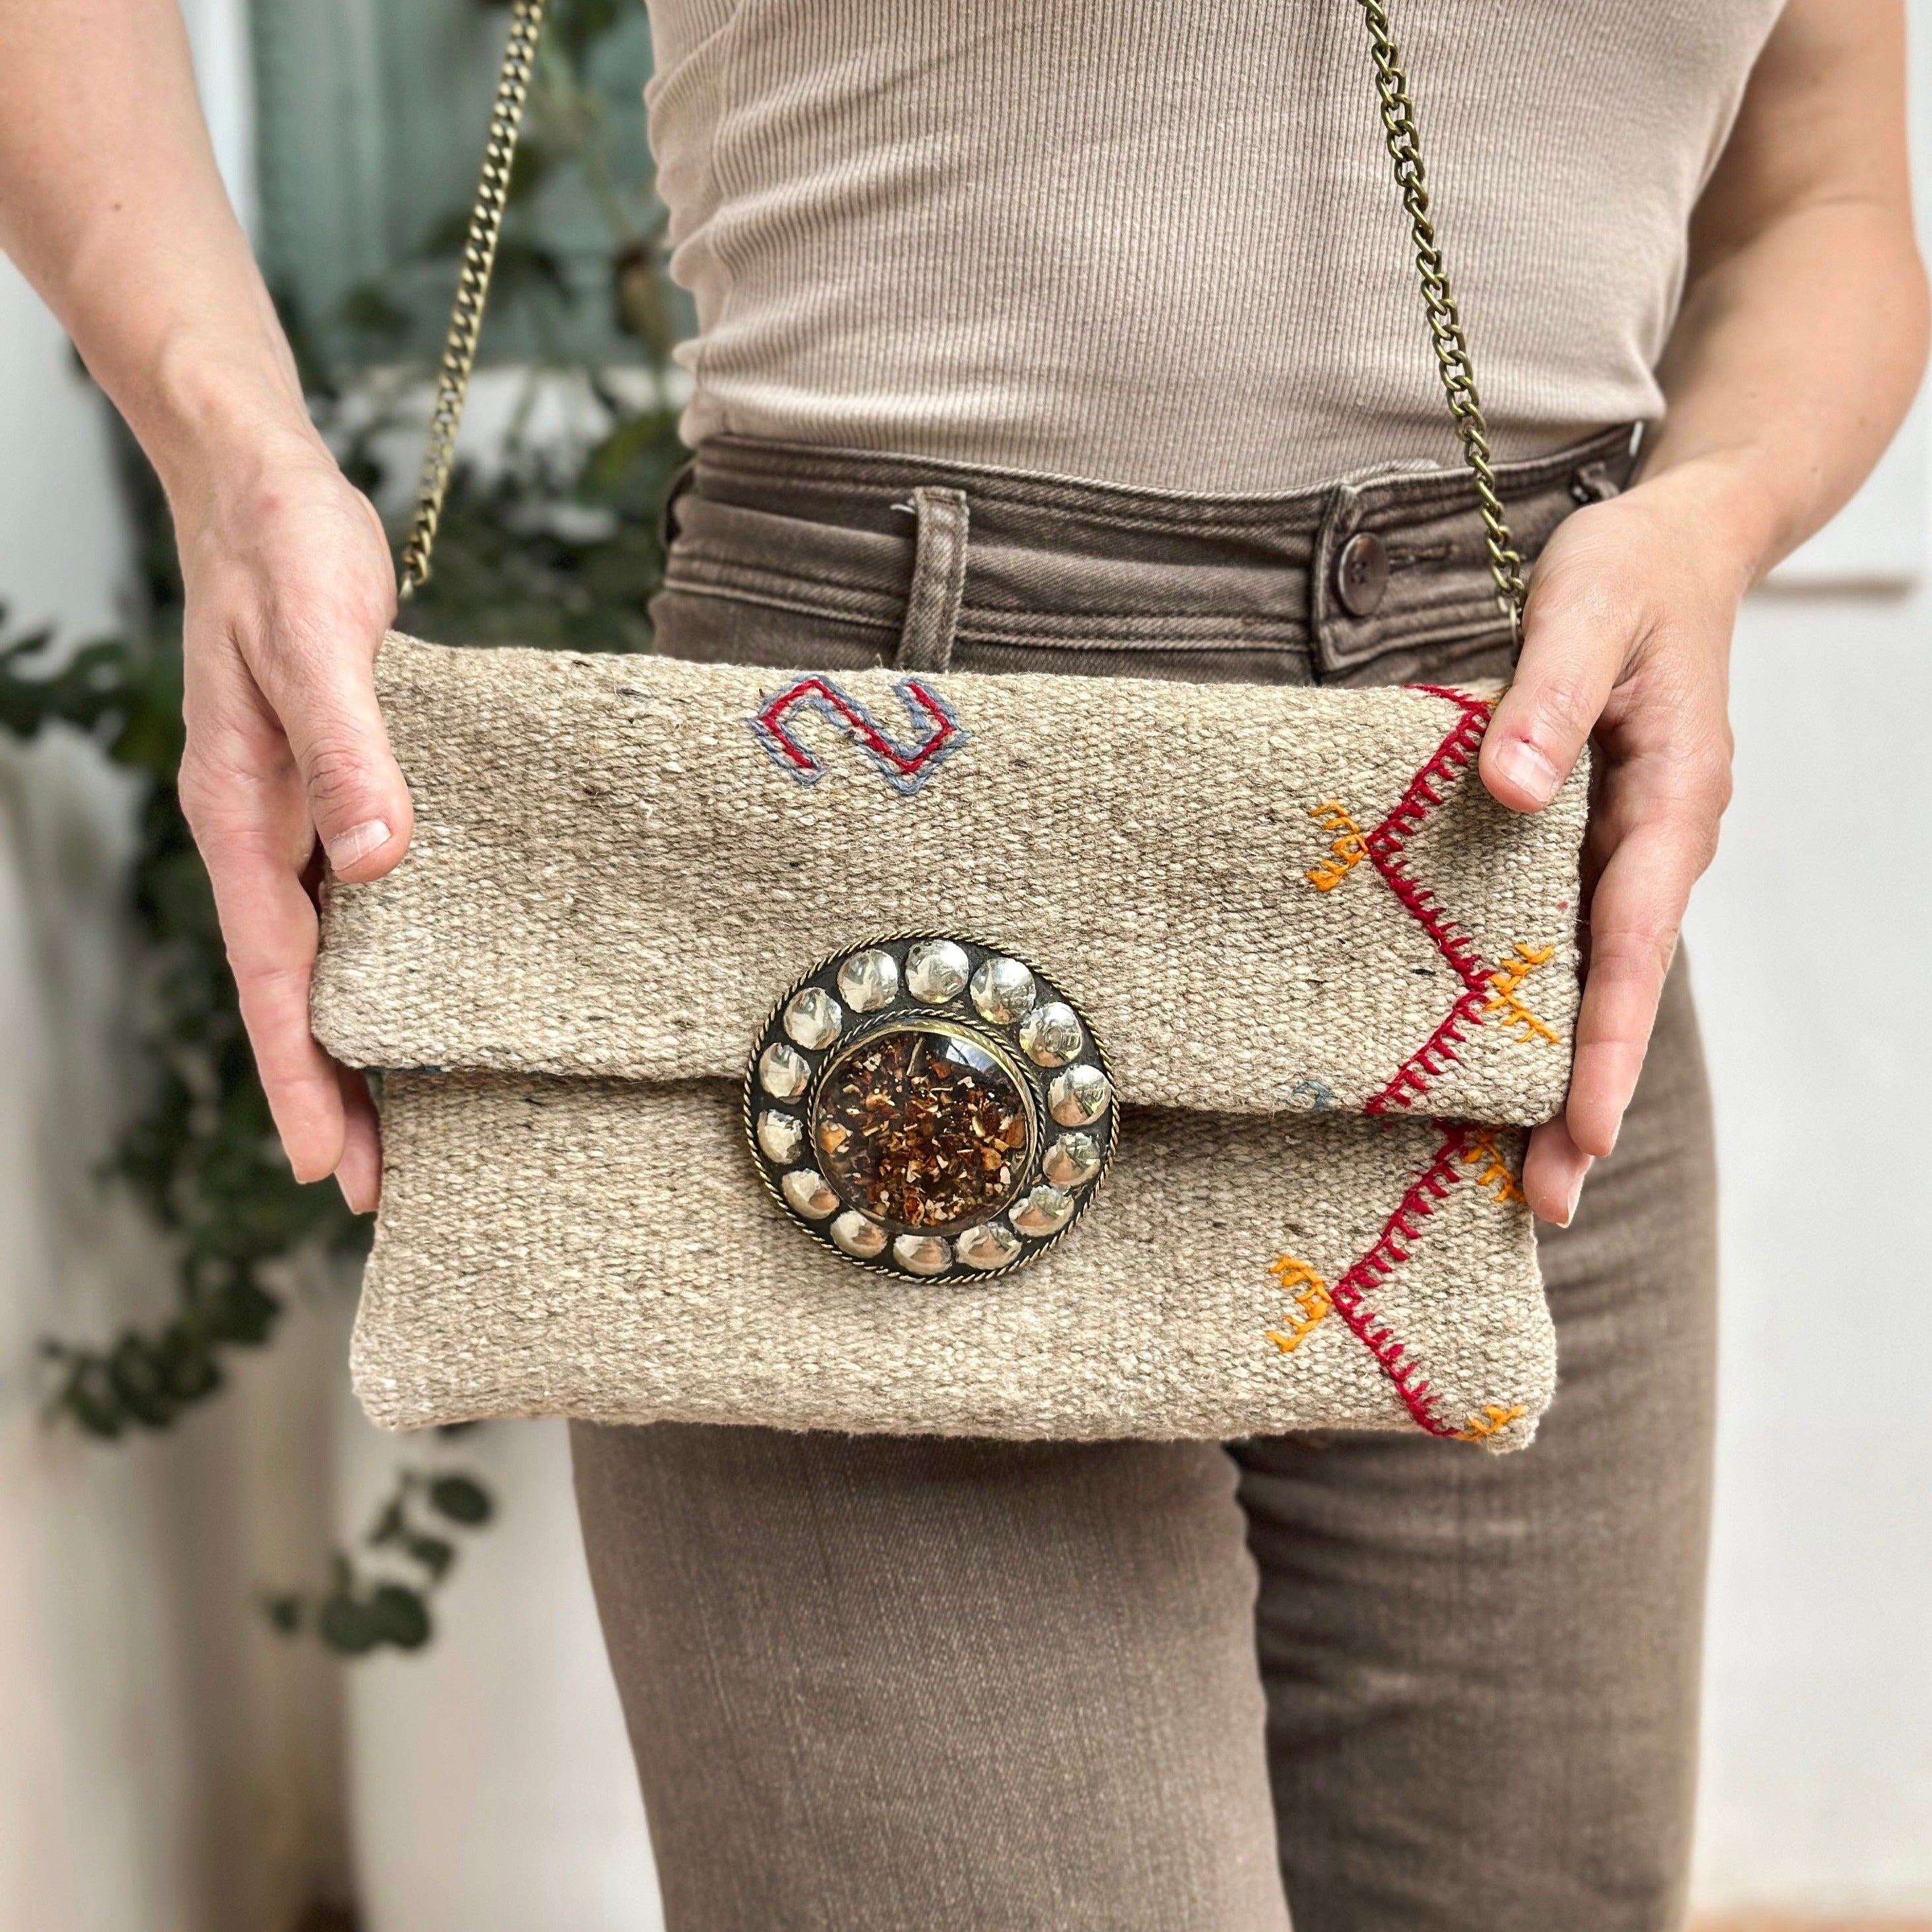 Terra Upcycled Clutch